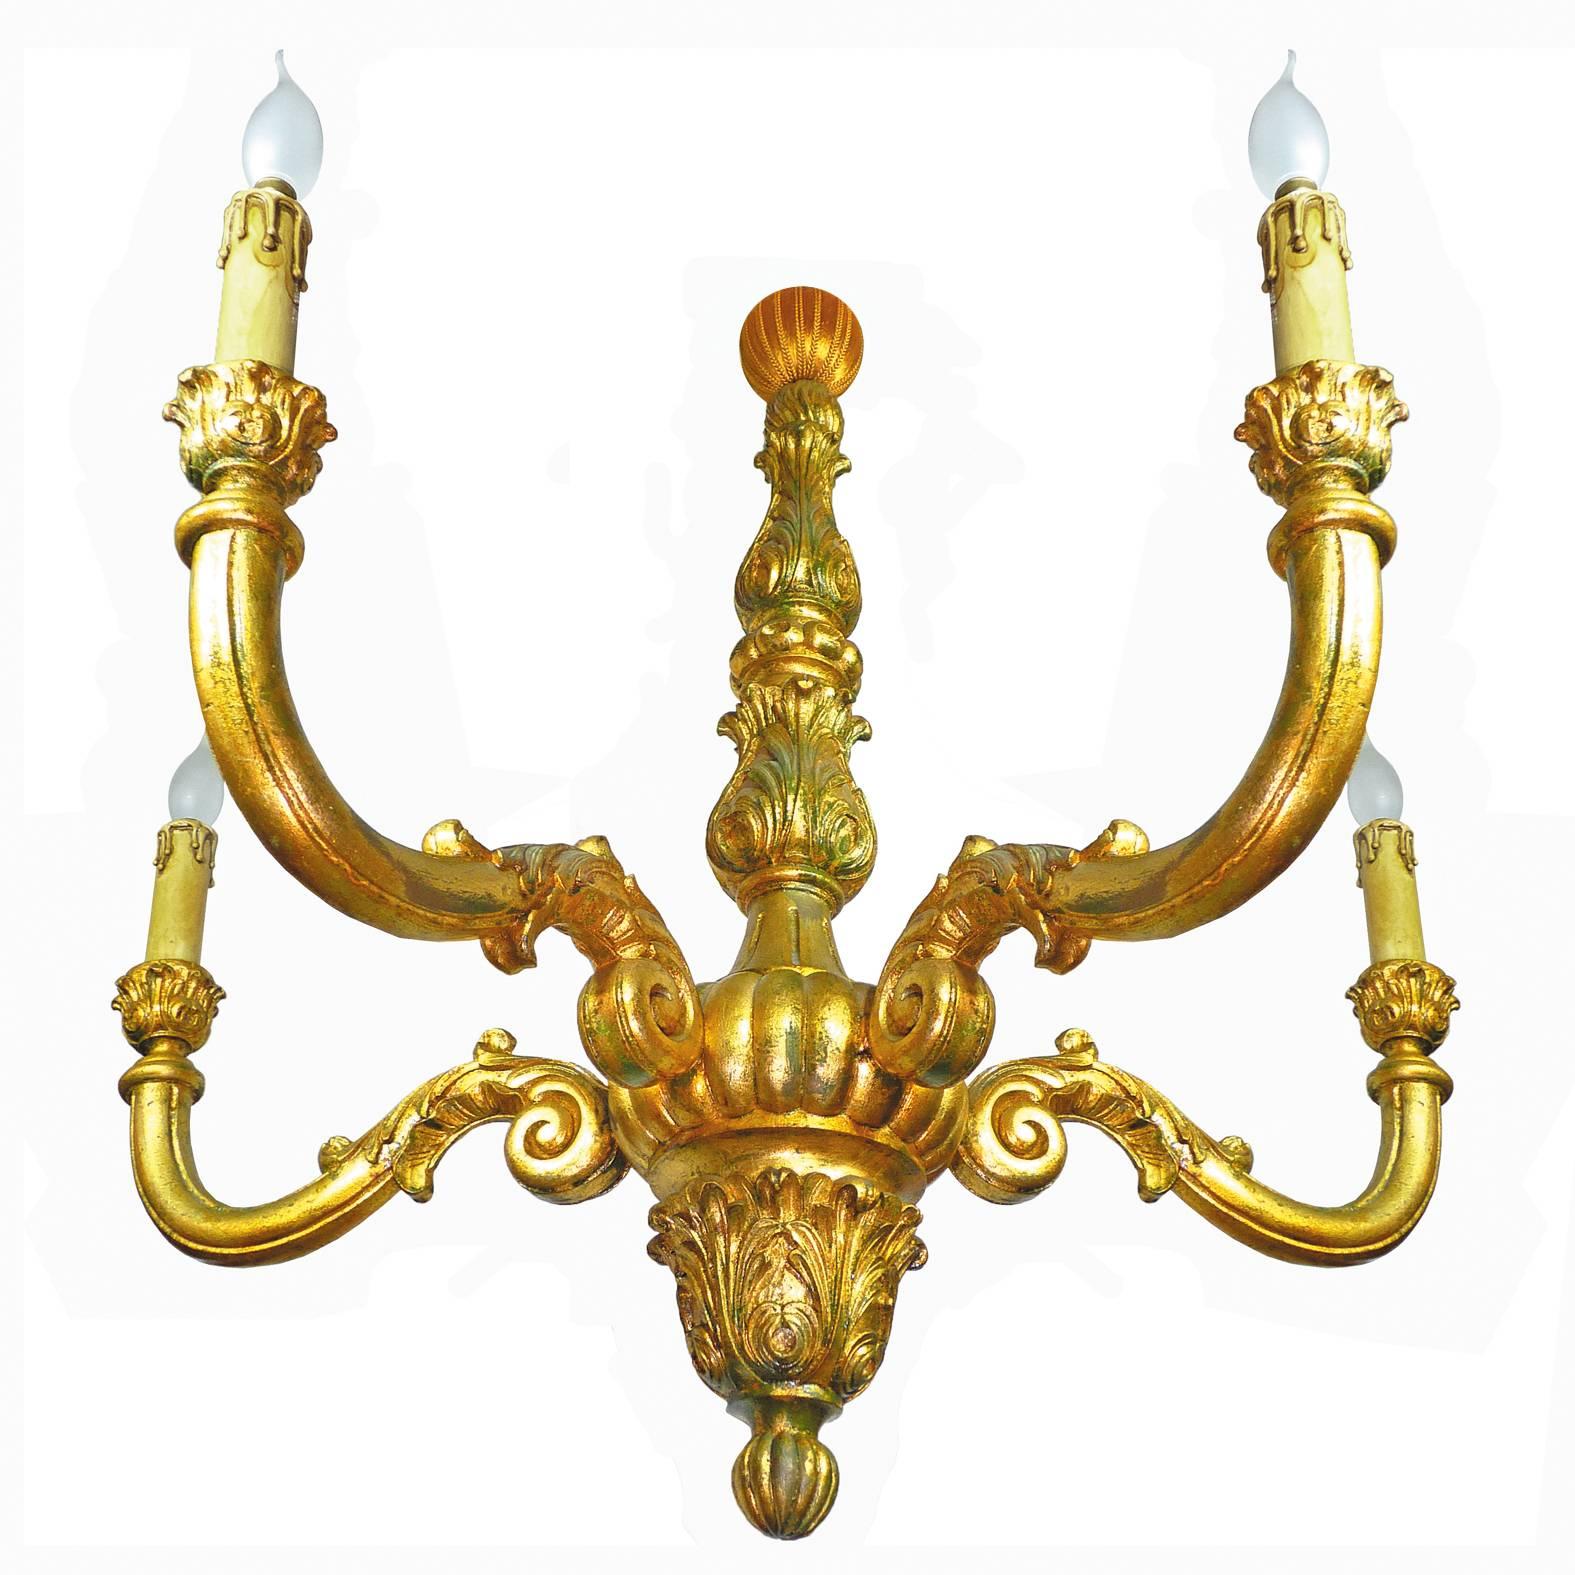 Large neoclassic wood carved gold leaf Baroque giltwood five-light chandelier
Measures: 
Diameter: 36 in/ 90 cm
Height: 36 in / 90 cm 
Five light bulbs E14/ good working condition/European wiring.
Your item will be carefully packed. Assembly